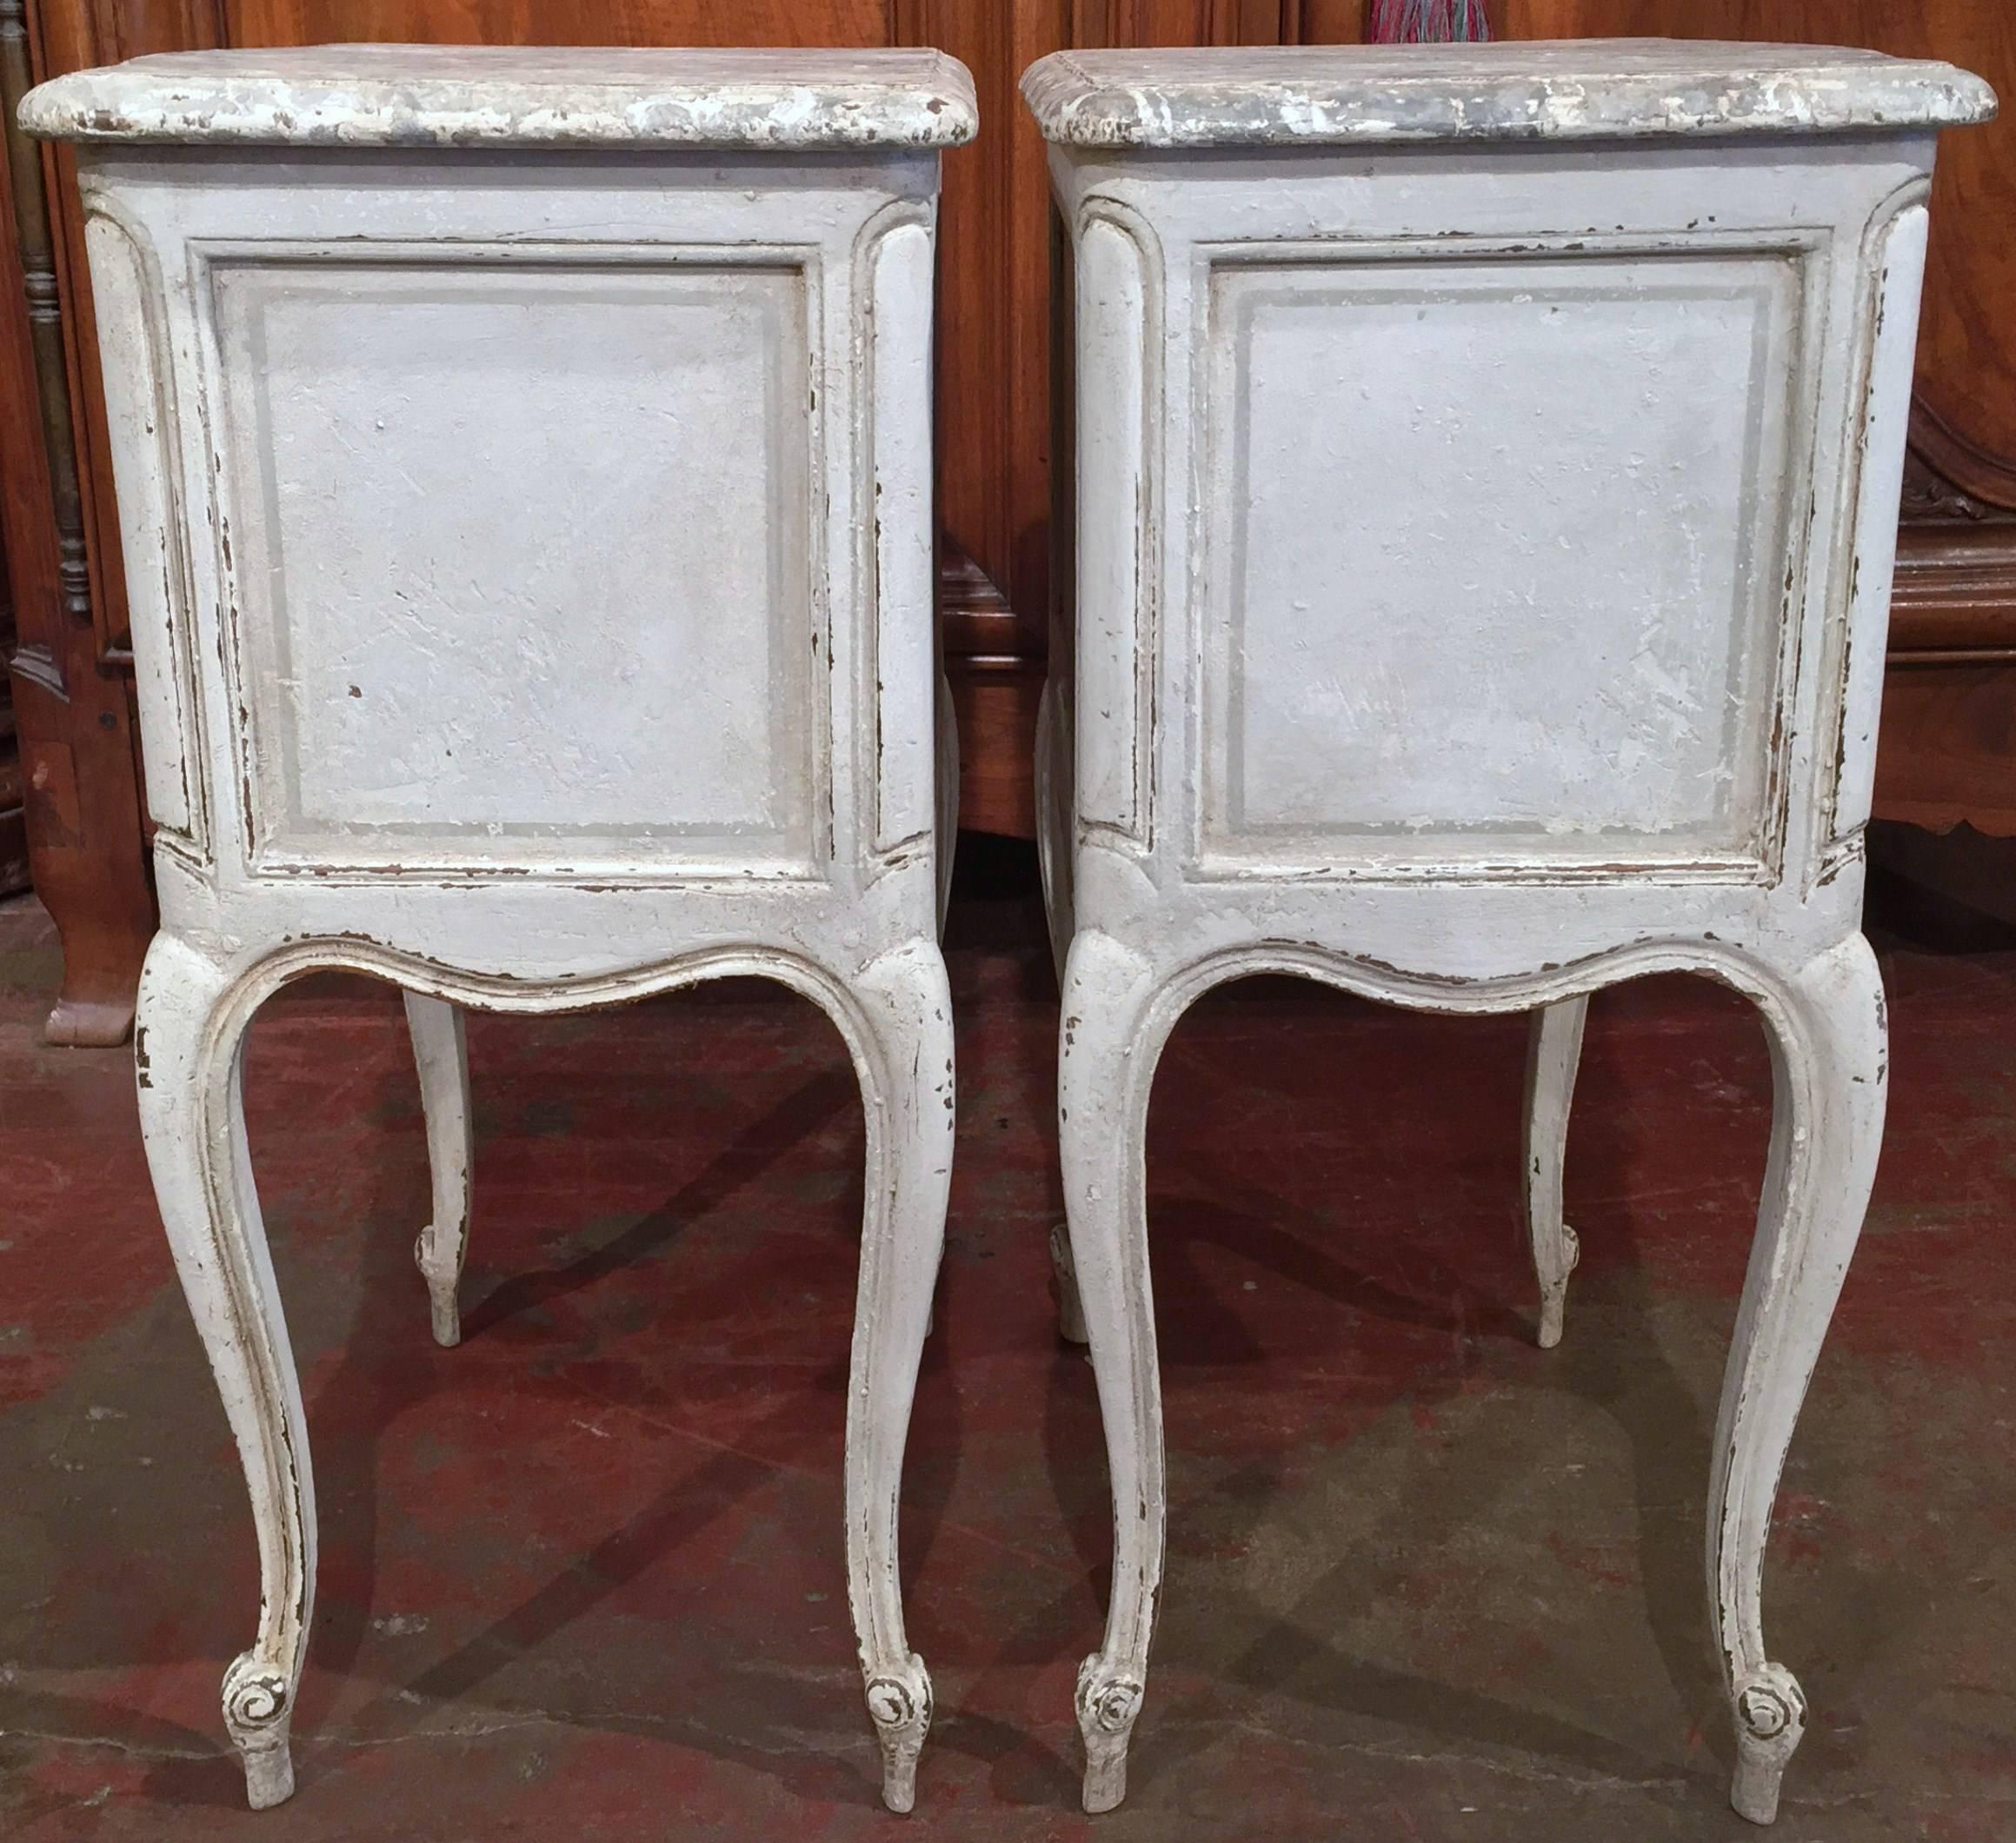 Wood Pair of 19th Century French Carved Painted Bedside Tables with Faux Marble Top